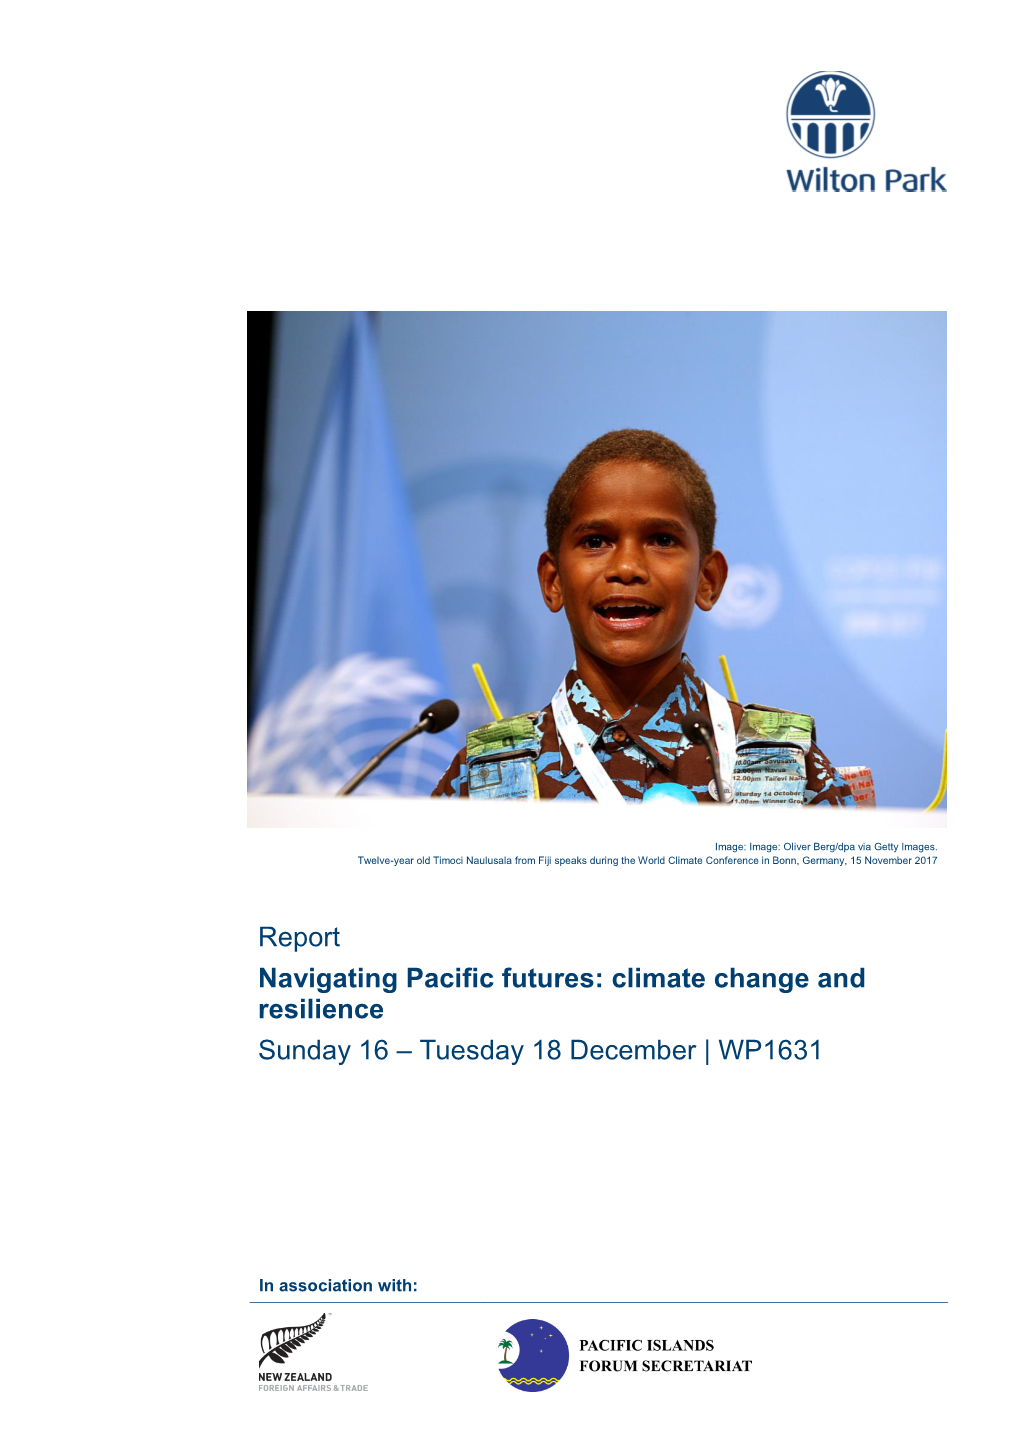 Navigating Pacific Futures: Climate Change and Resilience Sunday 16 – Tuesday 18 December | WP1631